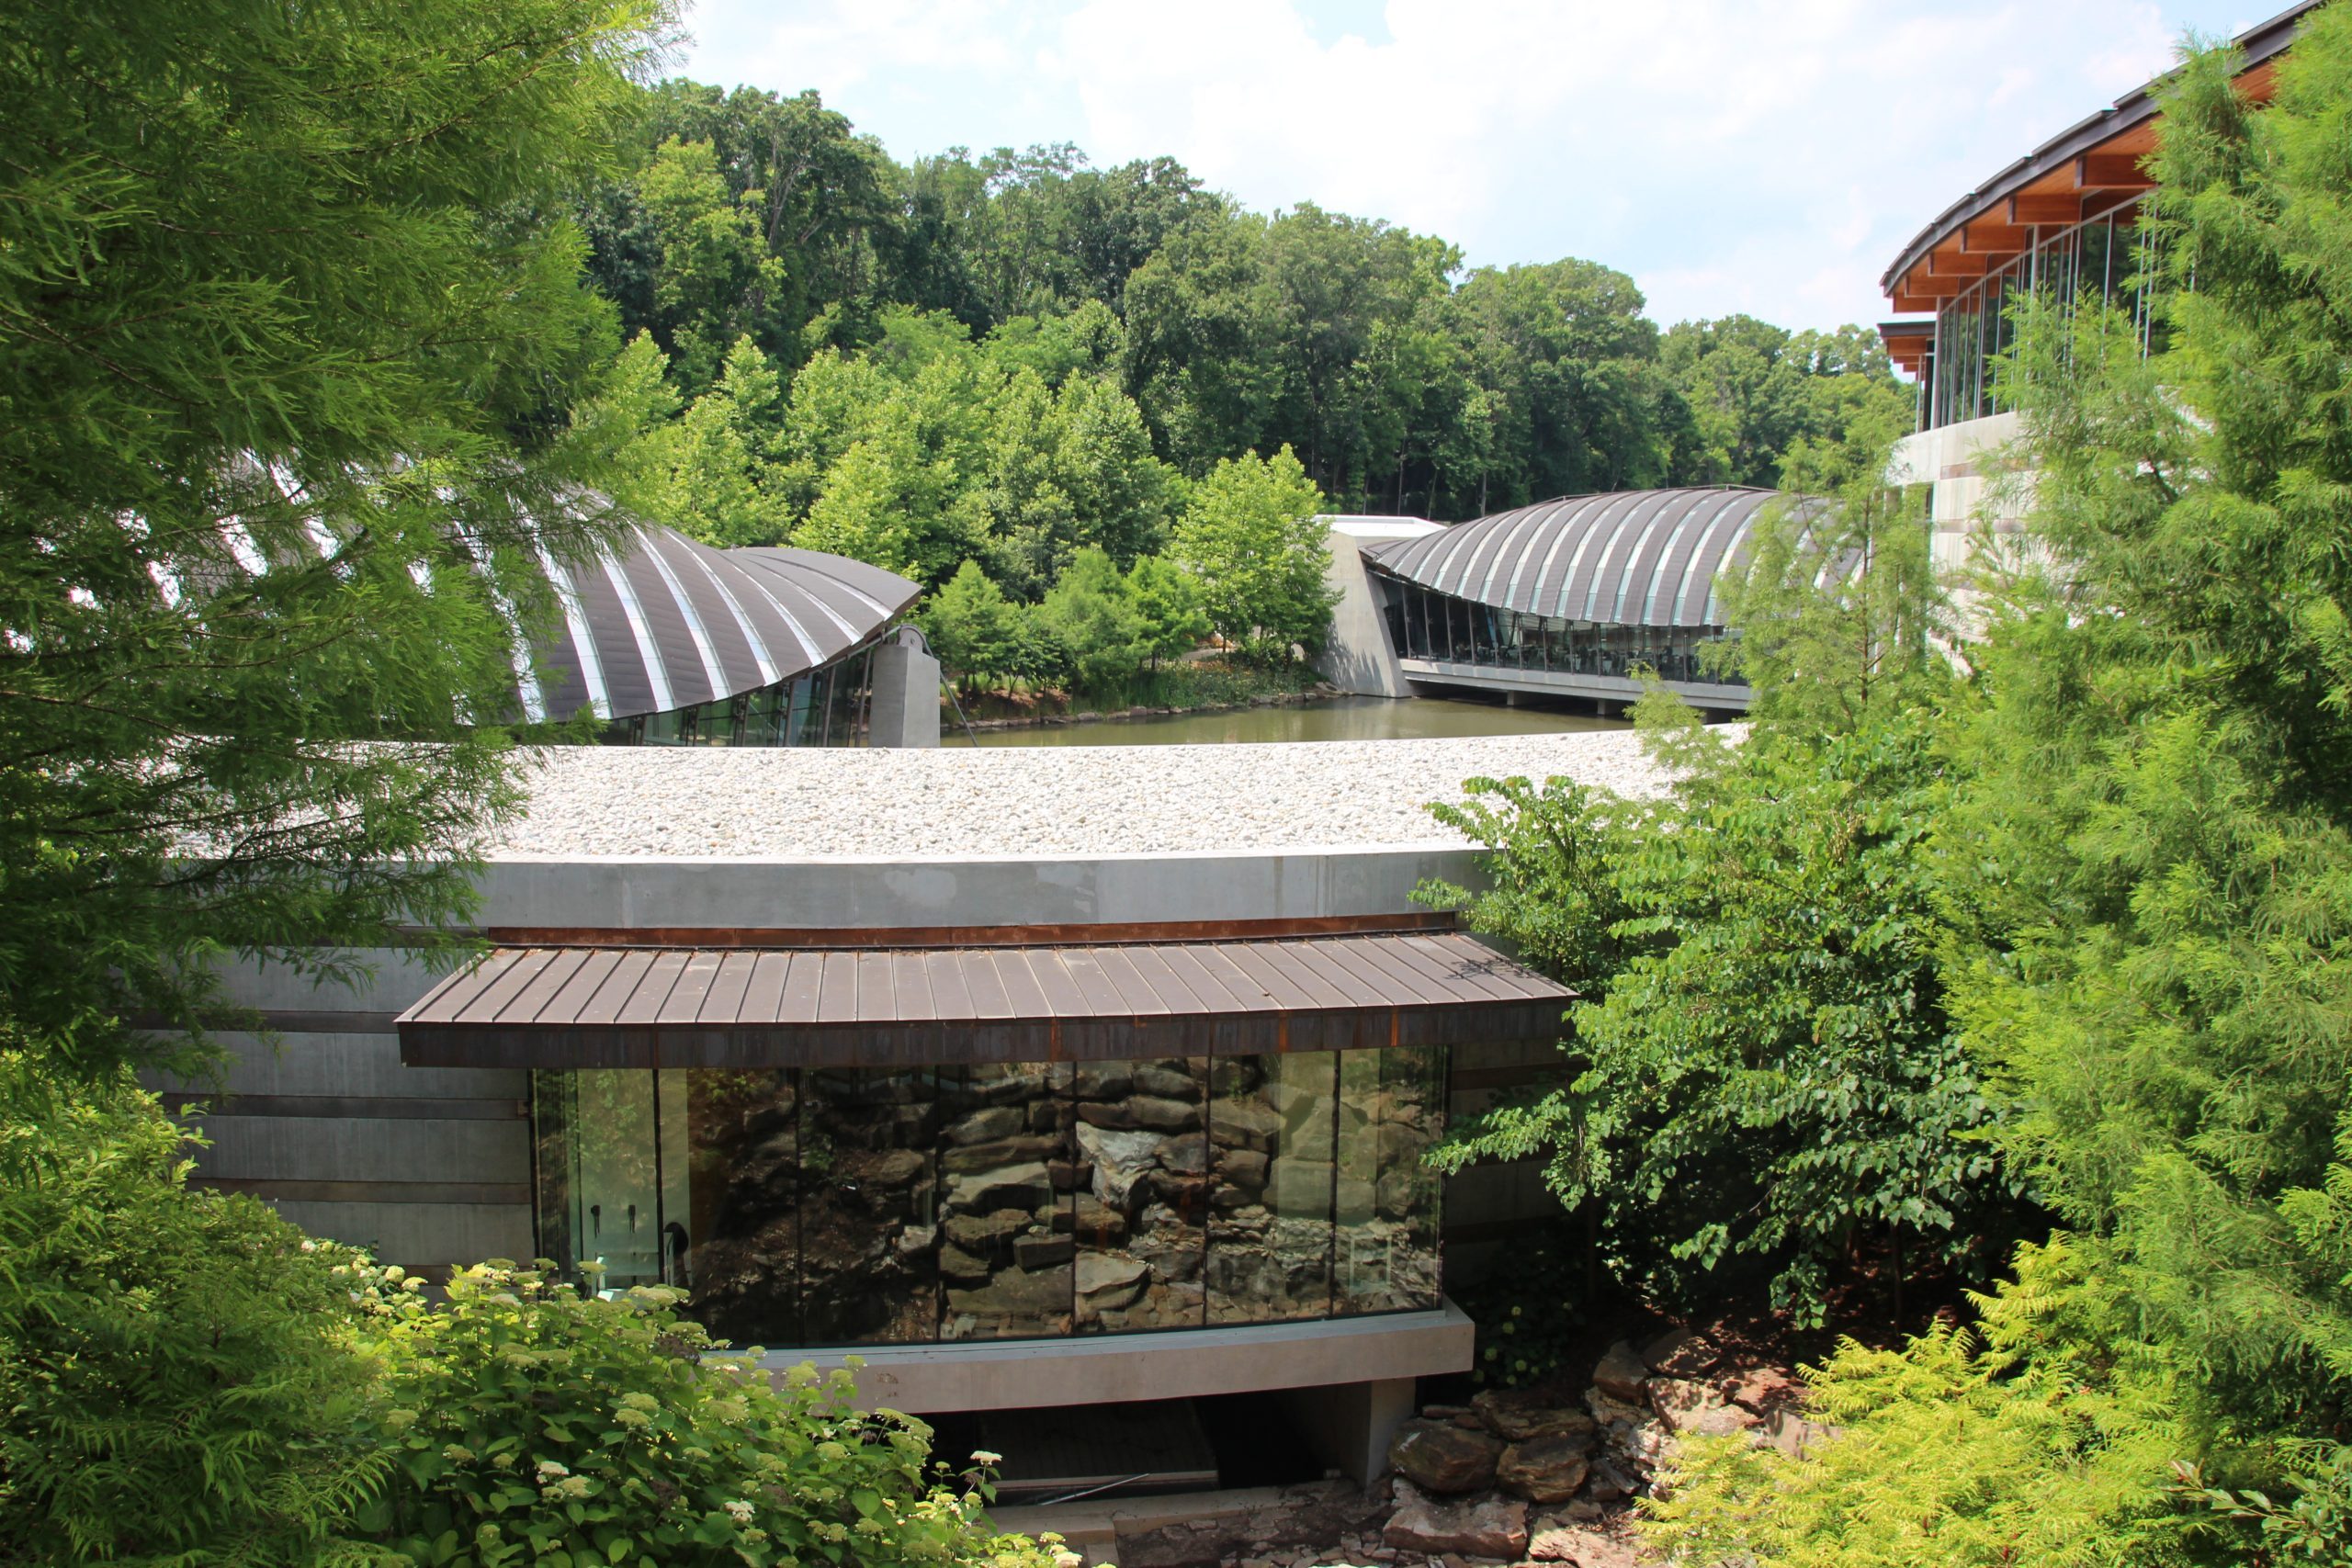 <div class="textwidget"> <p>Arkansas might not be the state that comes to mind when you think of American art, but the collections at <a href="https://www.tripadvisor.com/Attraction_Review-g31441-d877831-Reviews-Crystal_Bridges_Museum_of_American_Art-Bentonville_Arkansas.html" rel="noopener">this museum</a> might change your mind. In addition to permanent art including sculptures and paintings, special exhibits frequent the museum too. Please check <a href="https://crystalbridges.org/" rel="noopener">the website</a> for specific hours, then browse through these tips for <a href="https://www.rd.com/list/how-to-travel-for-free-seriously/" rel="noopener">how to travel for free</a>.</p> <p class="listicle-page__cta-button-shop"><a class="shop-btn" href="https://www.tripadvisor.com/Attraction_Review-g31441-d877831-Reviews-Crystal_Bridges_Museum_of_American_Art-Bentonville_Arkansas.html">Learn More</a></p> </div>